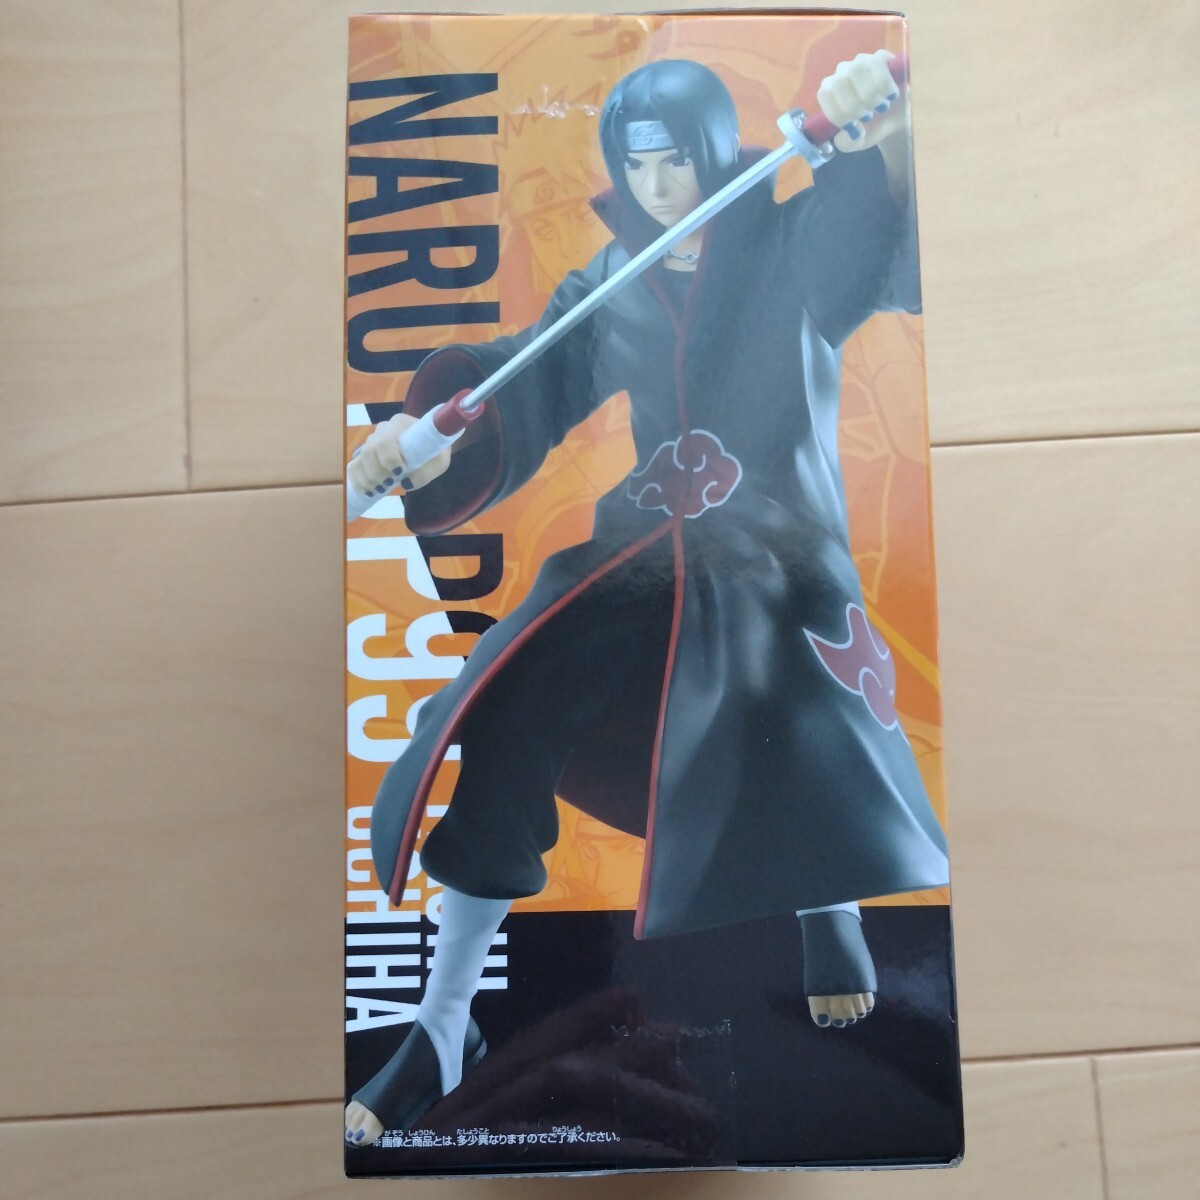 ( most cheap postage, outside fixed form 510 jpy )NARUTO- Naruto -NARUTOP99.. is itachi figure [ postage in explanatory note .] including in a package possible 